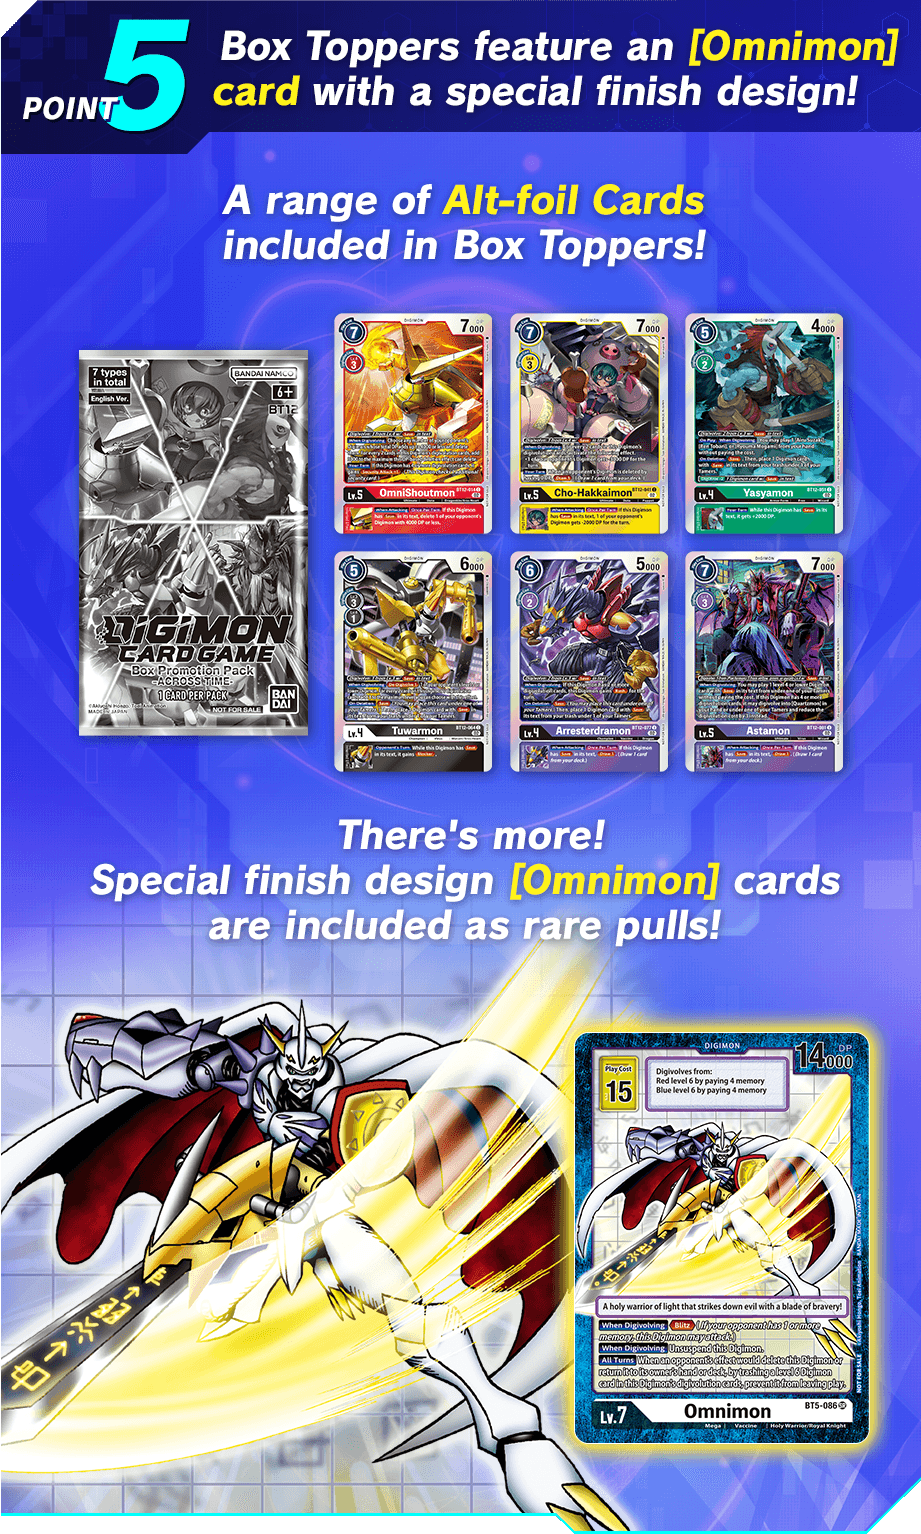 POINT5 Box Toppers feature an [Omnimon] card with a special finish design!